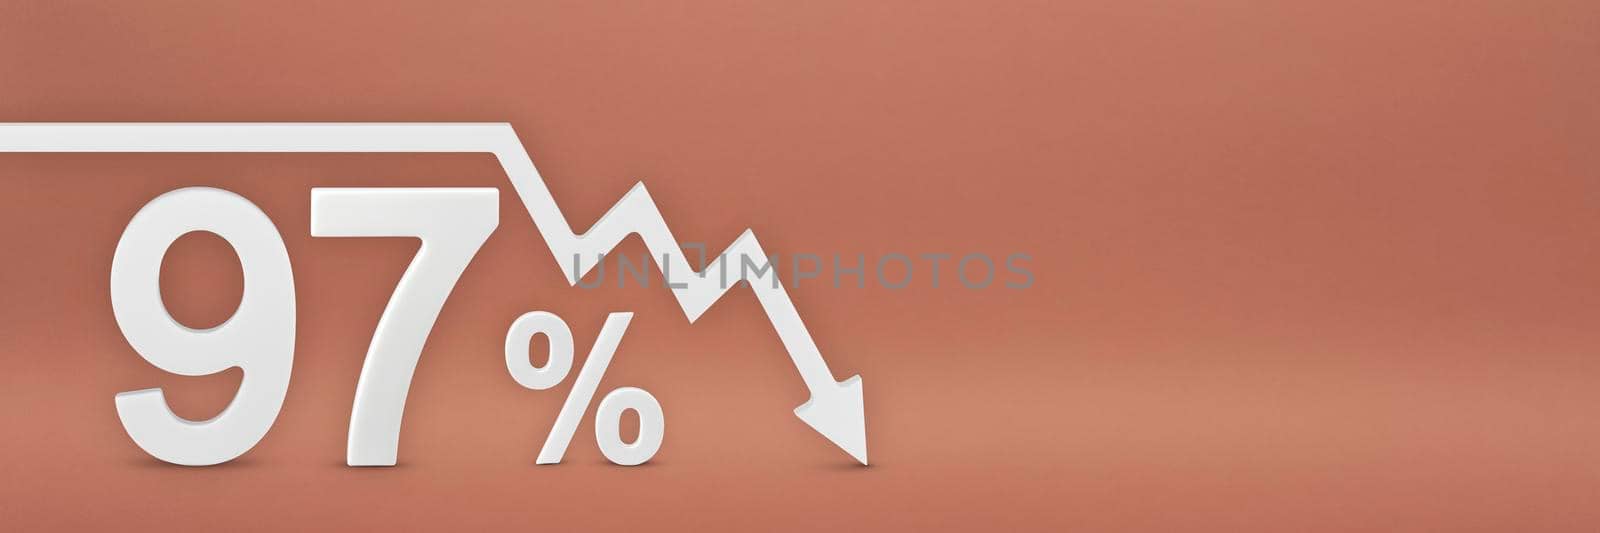 ninety-seven percent, the arrow on the graph is pointing down. Stock market crash, bear market, inflation.Economic collapse, collapse of stocks.3d banner,97 percent discount sign on a red background